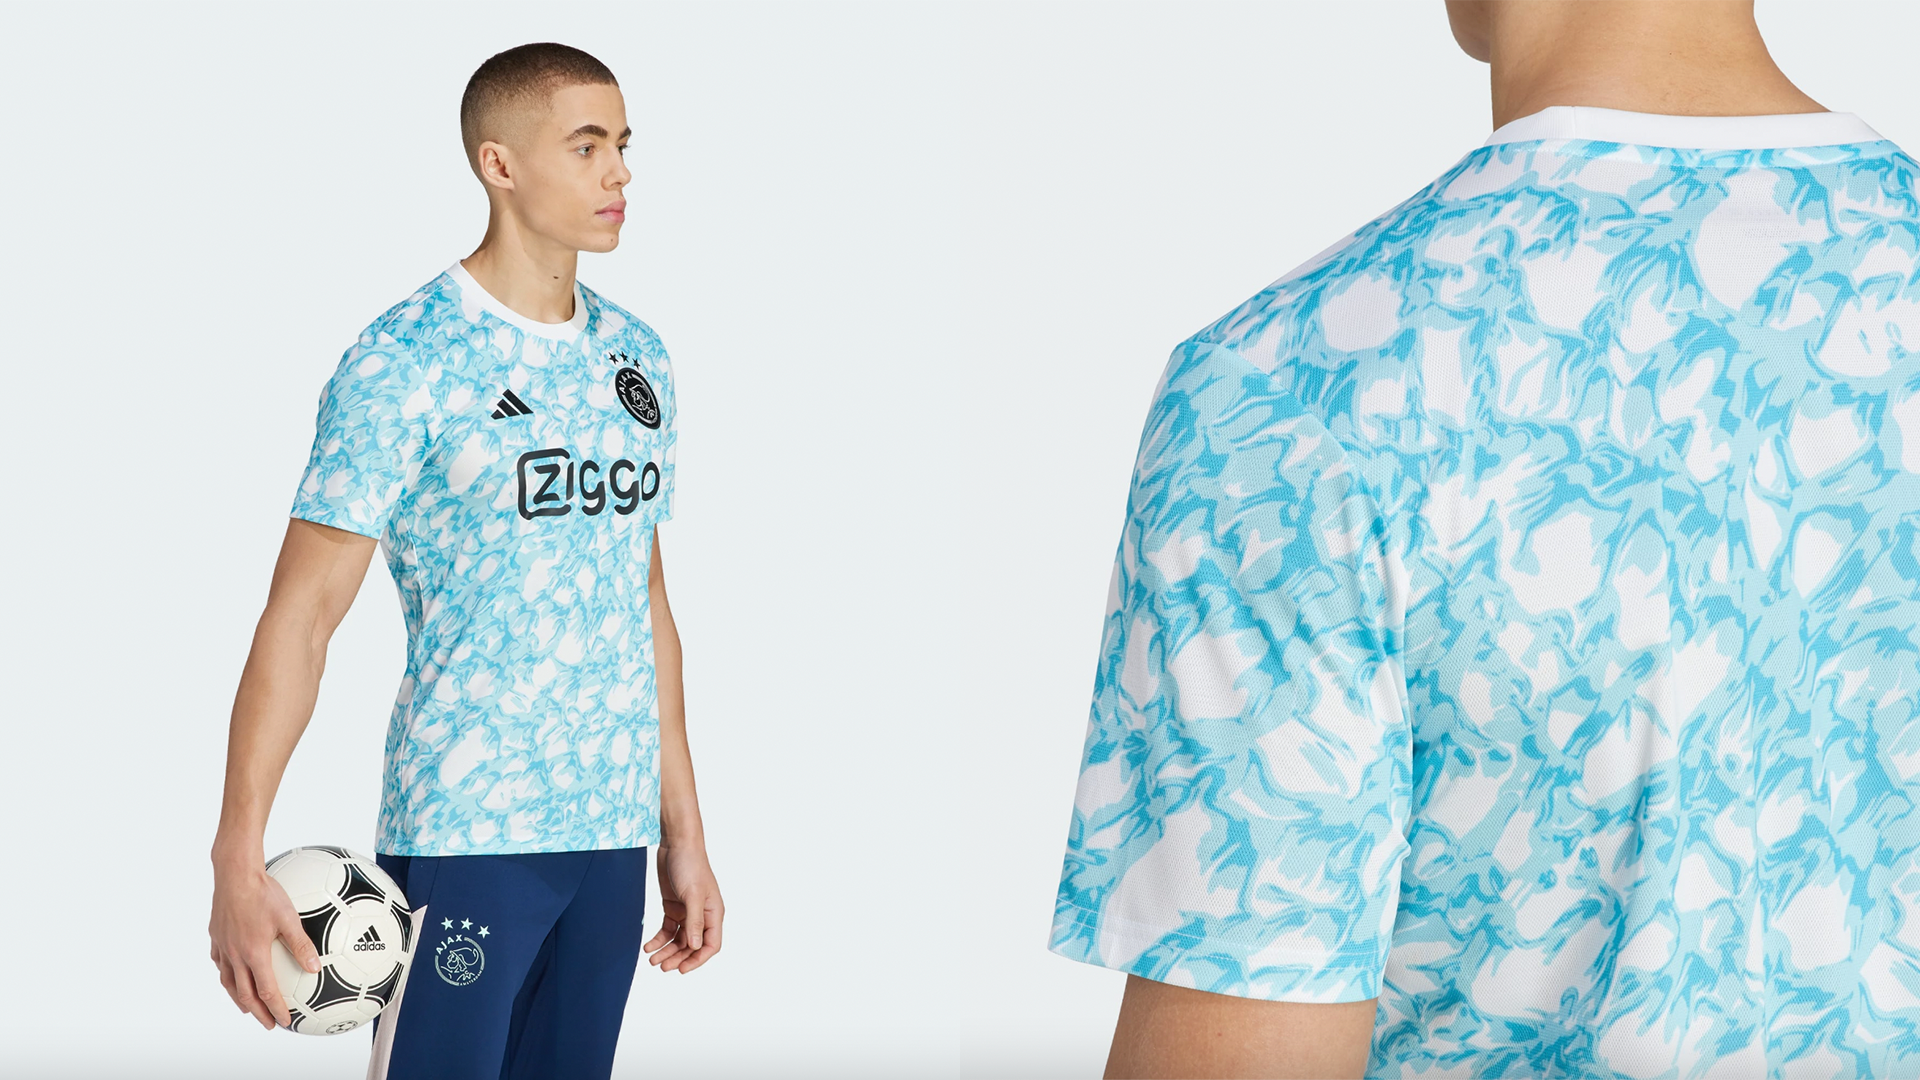 The 2021 MLS Primeblue Kits Once Again Shine a Light on the